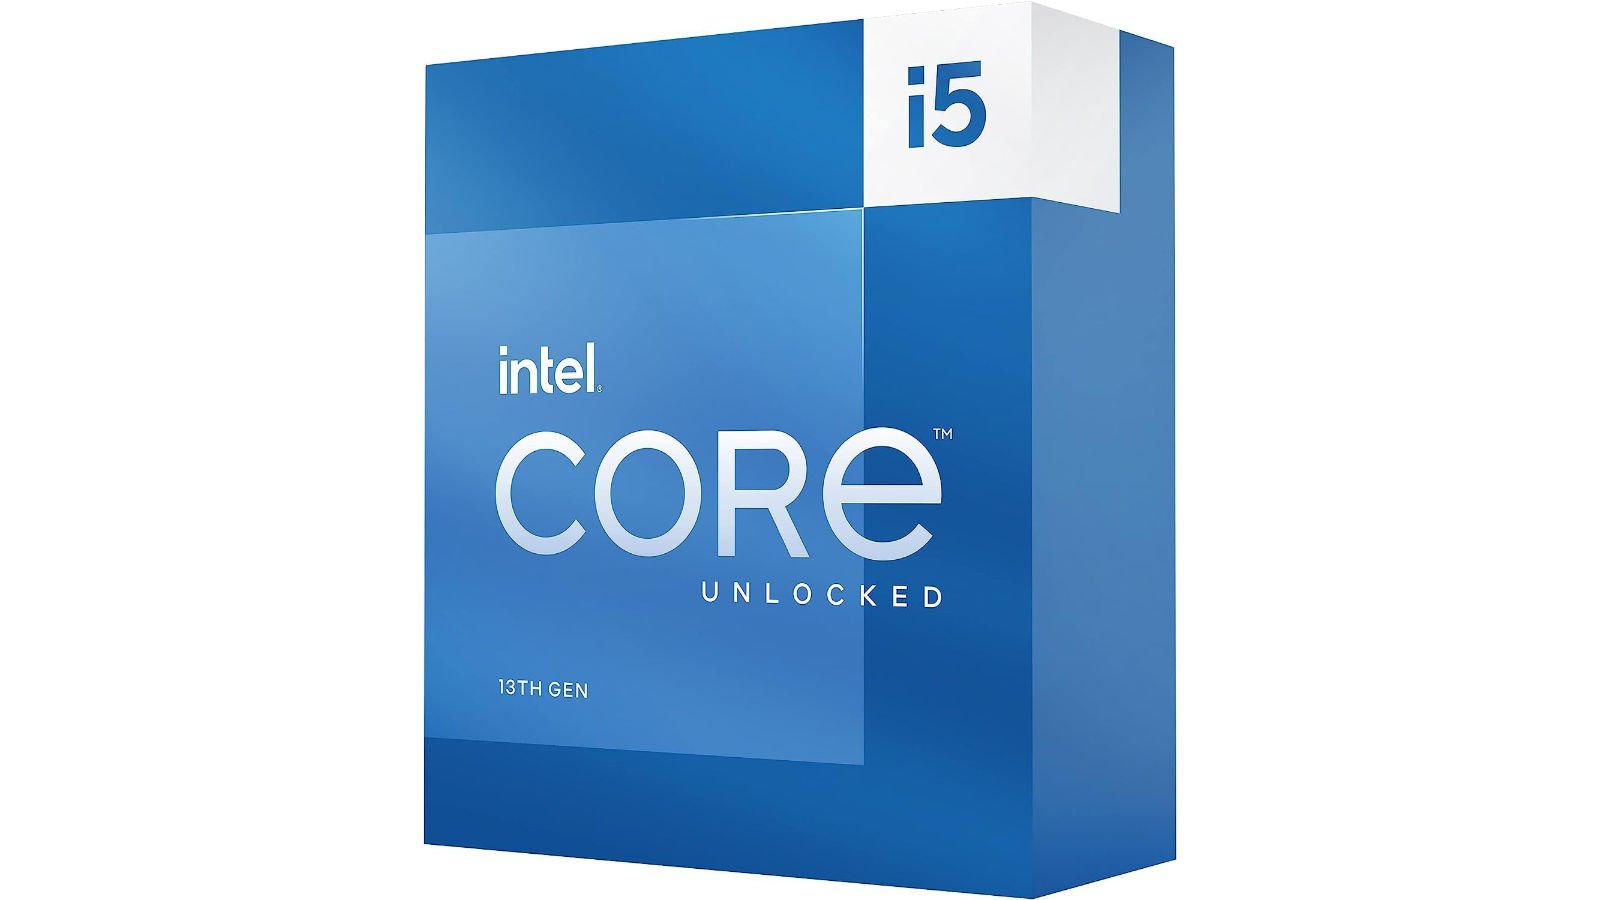 Intel Core i5 13th Gen retail box against a white background.